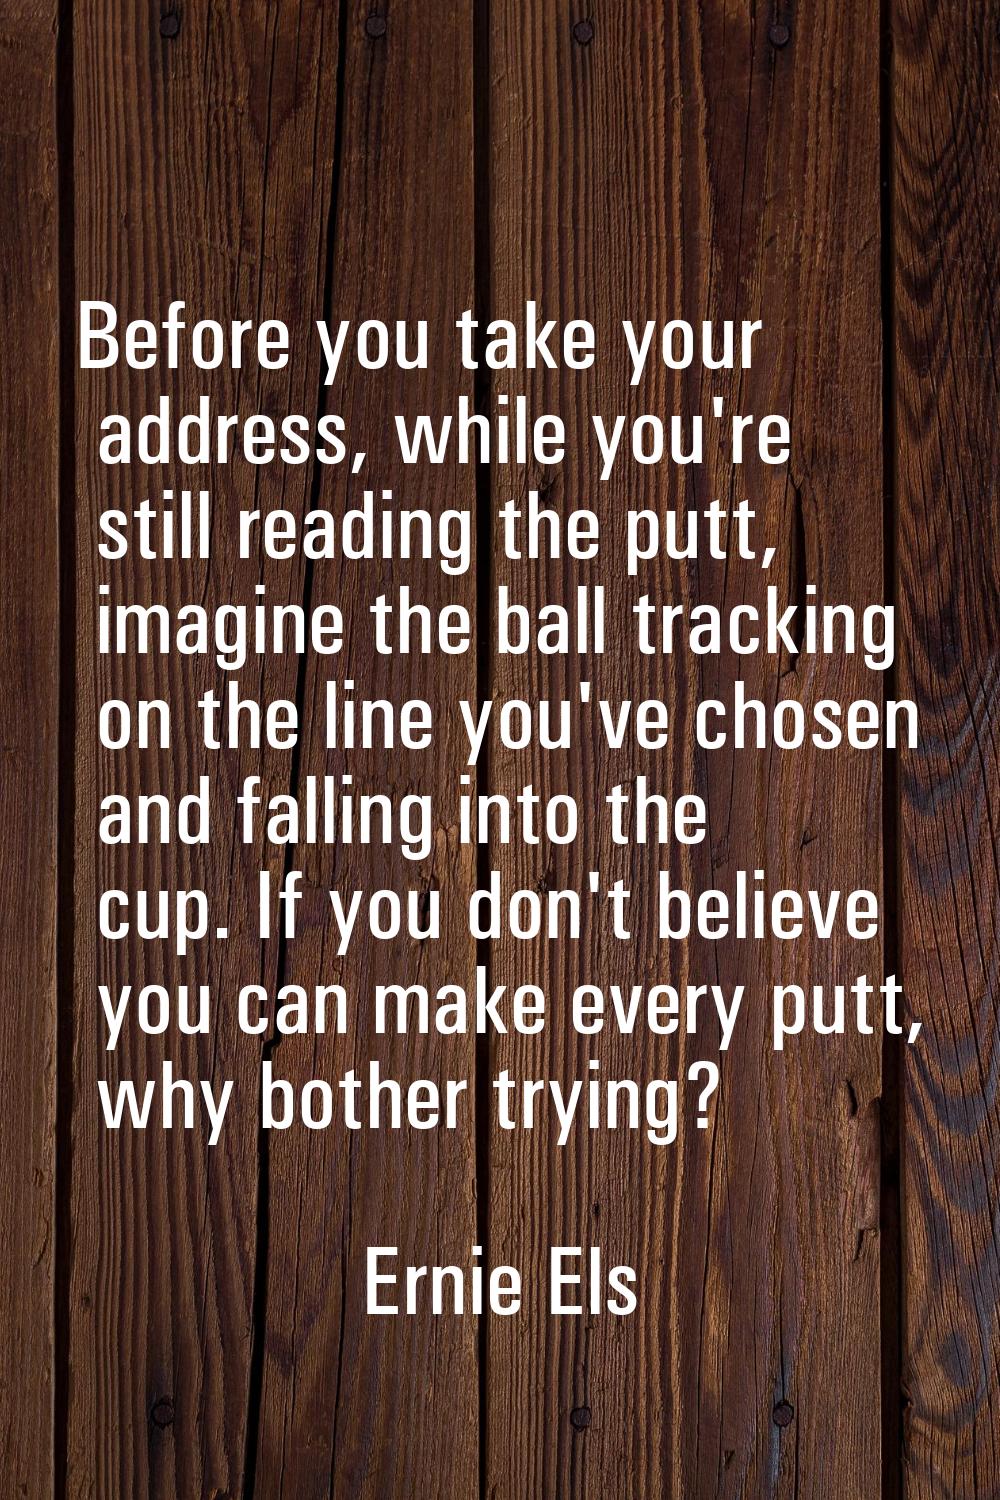 Before you take your address, while you're still reading the putt, imagine the ball tracking on the